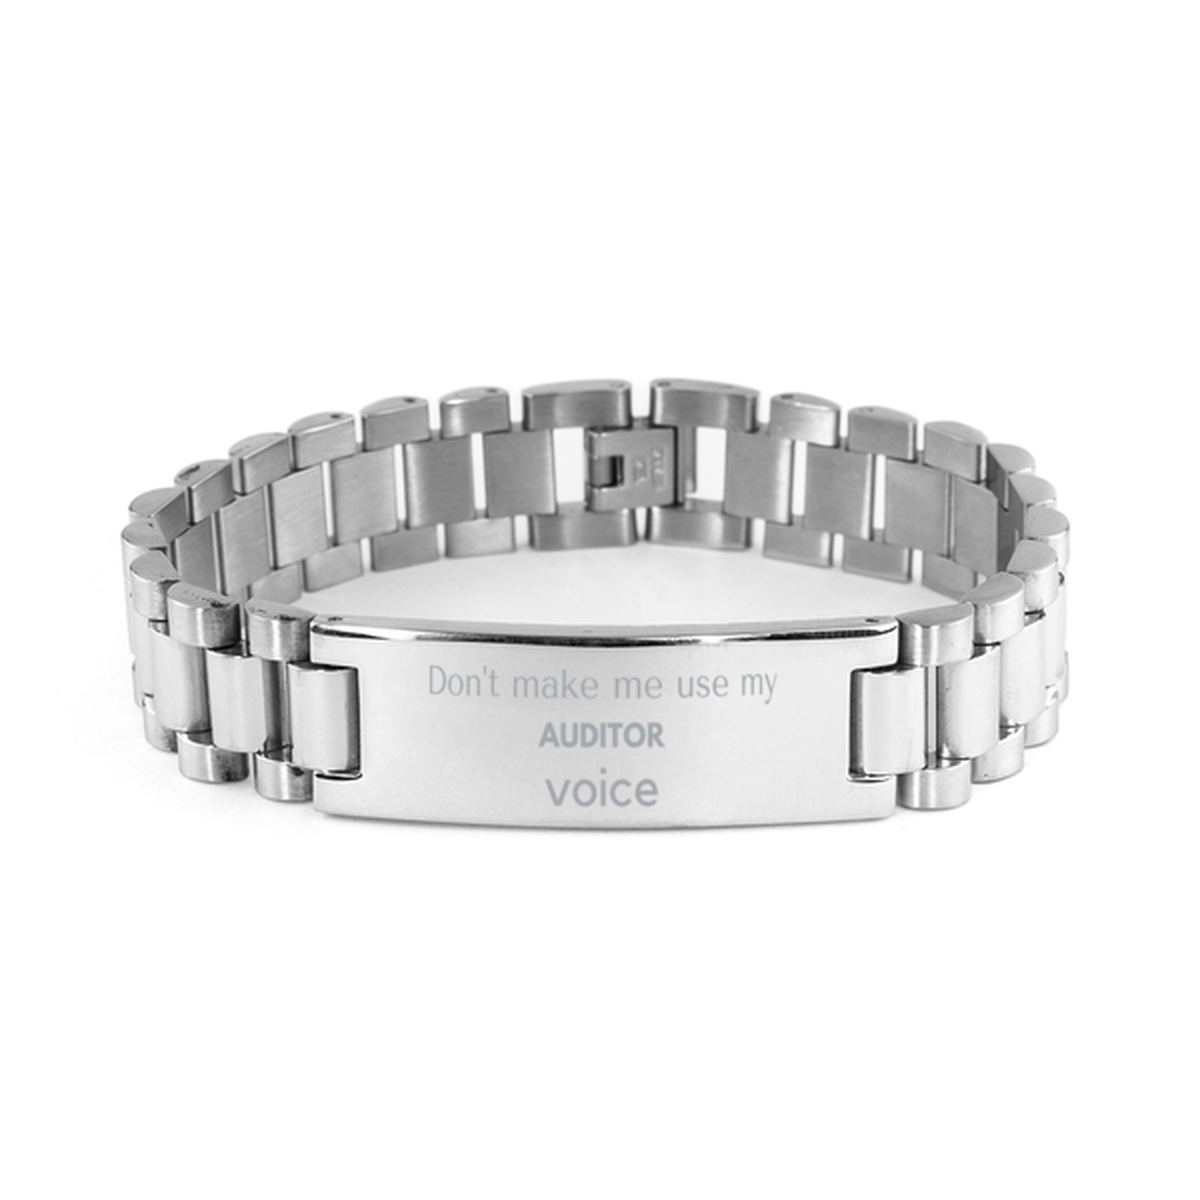 Don't make me use my Auditor voice, Sarcasm Auditor Gifts, Christmas Auditor Ladder Stainless Steel Bracelet Birthday Unique Gifts For Auditor Coworkers, Men, Women, Colleague, Friends